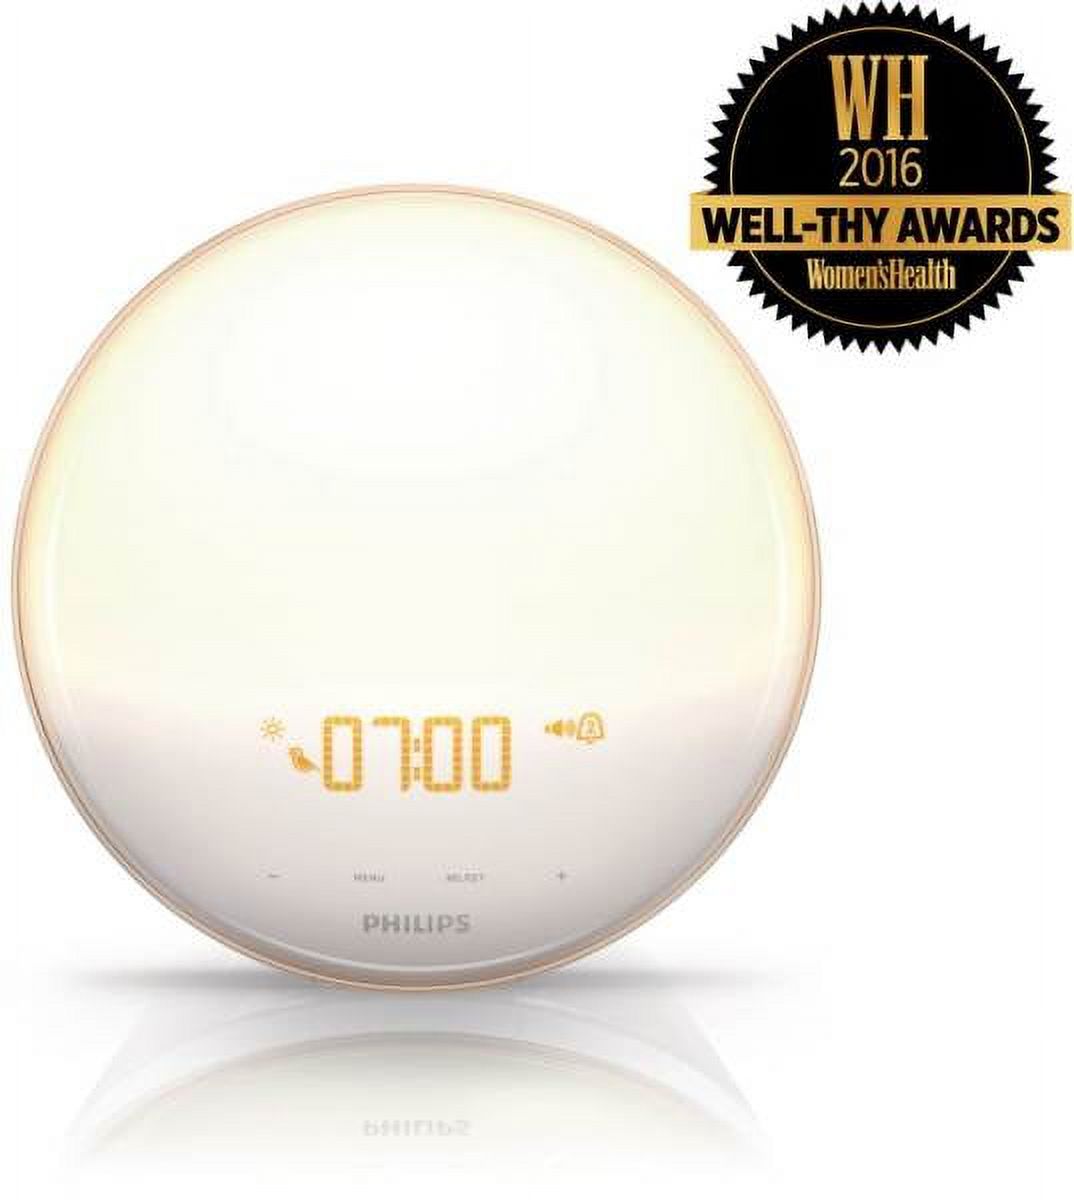 Philips Wake-up Light with Colored Sunrise, Sunset Simulation and New PowerBackUp+ Feature, HF3520/60 - image 5 of 16